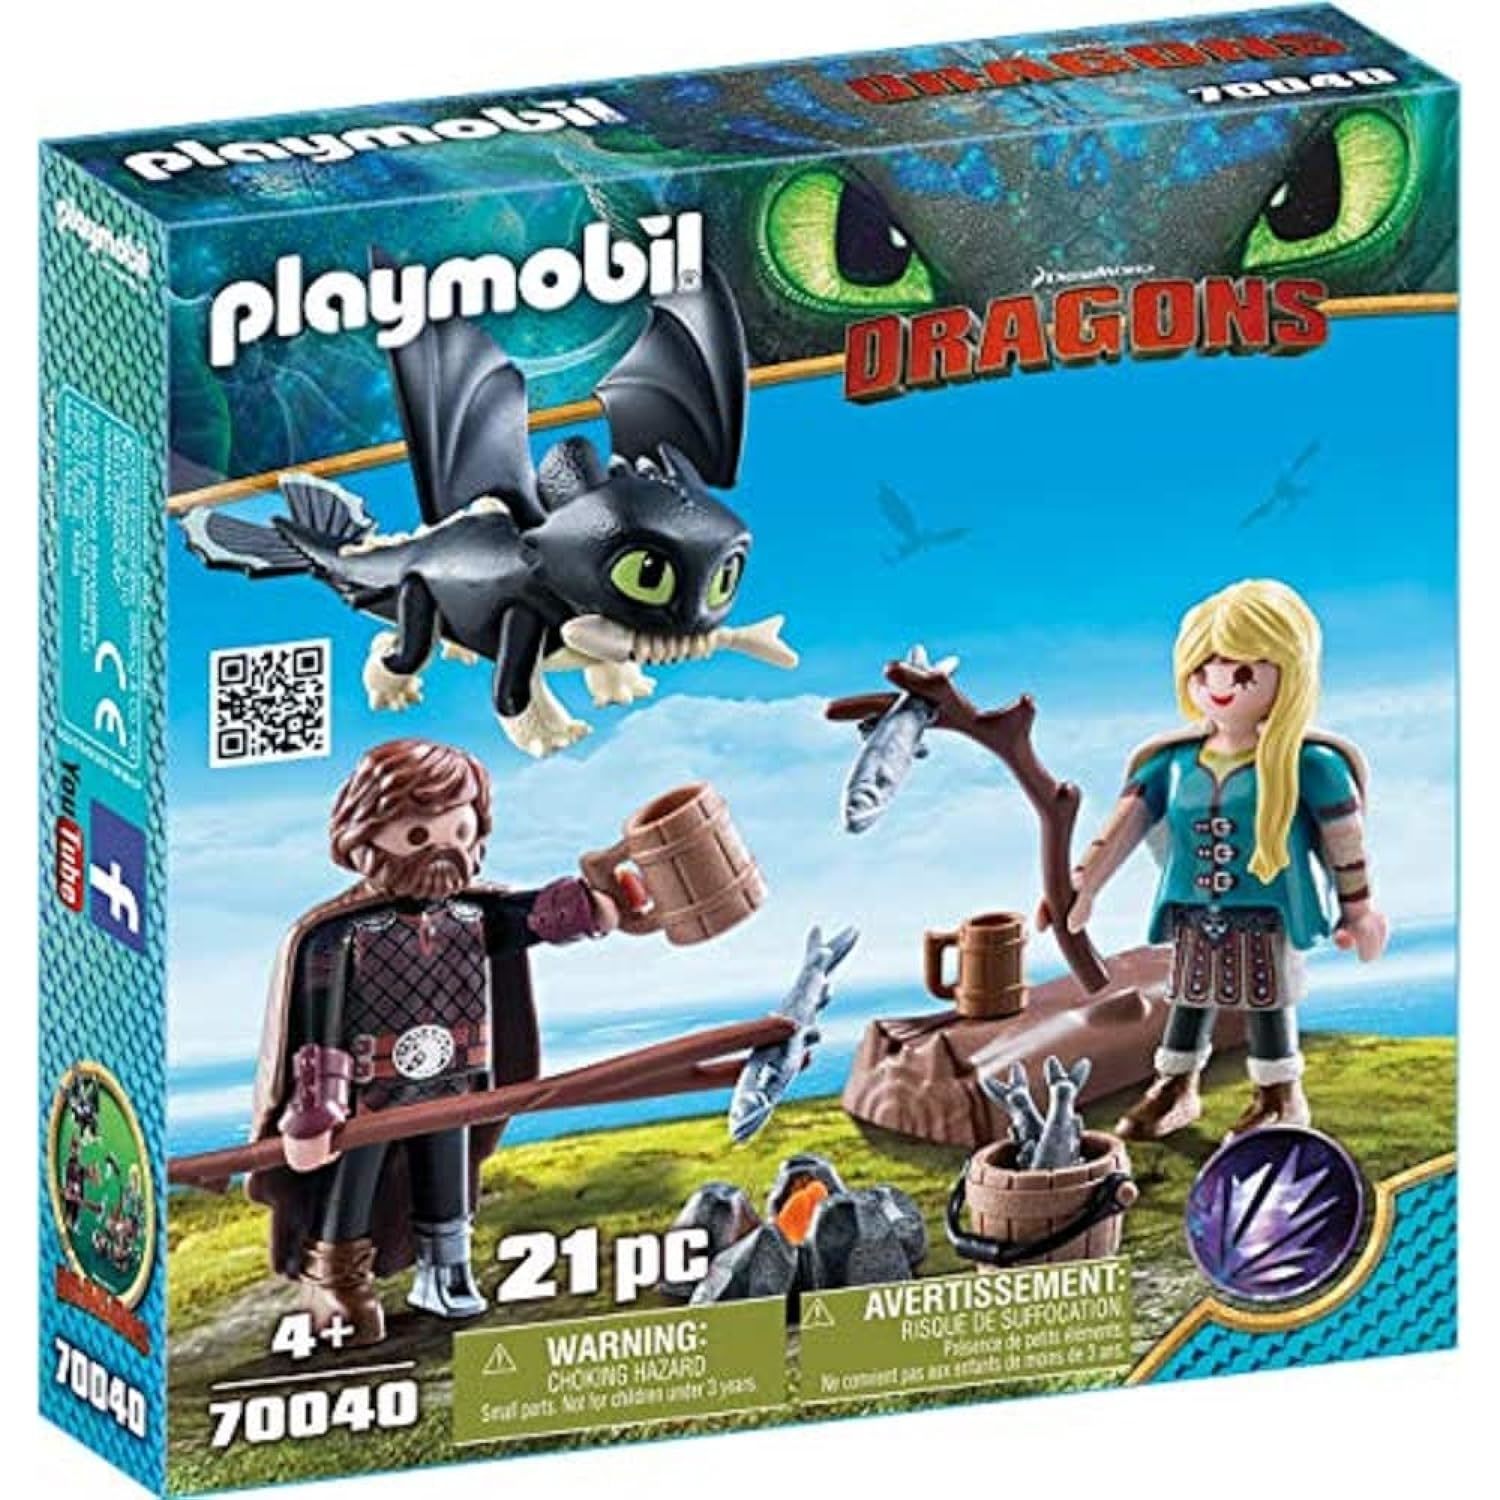 Playmobil How to Train Your Dragon III Hiccup & Astrid with Baby Dragon Multicol - $43.69